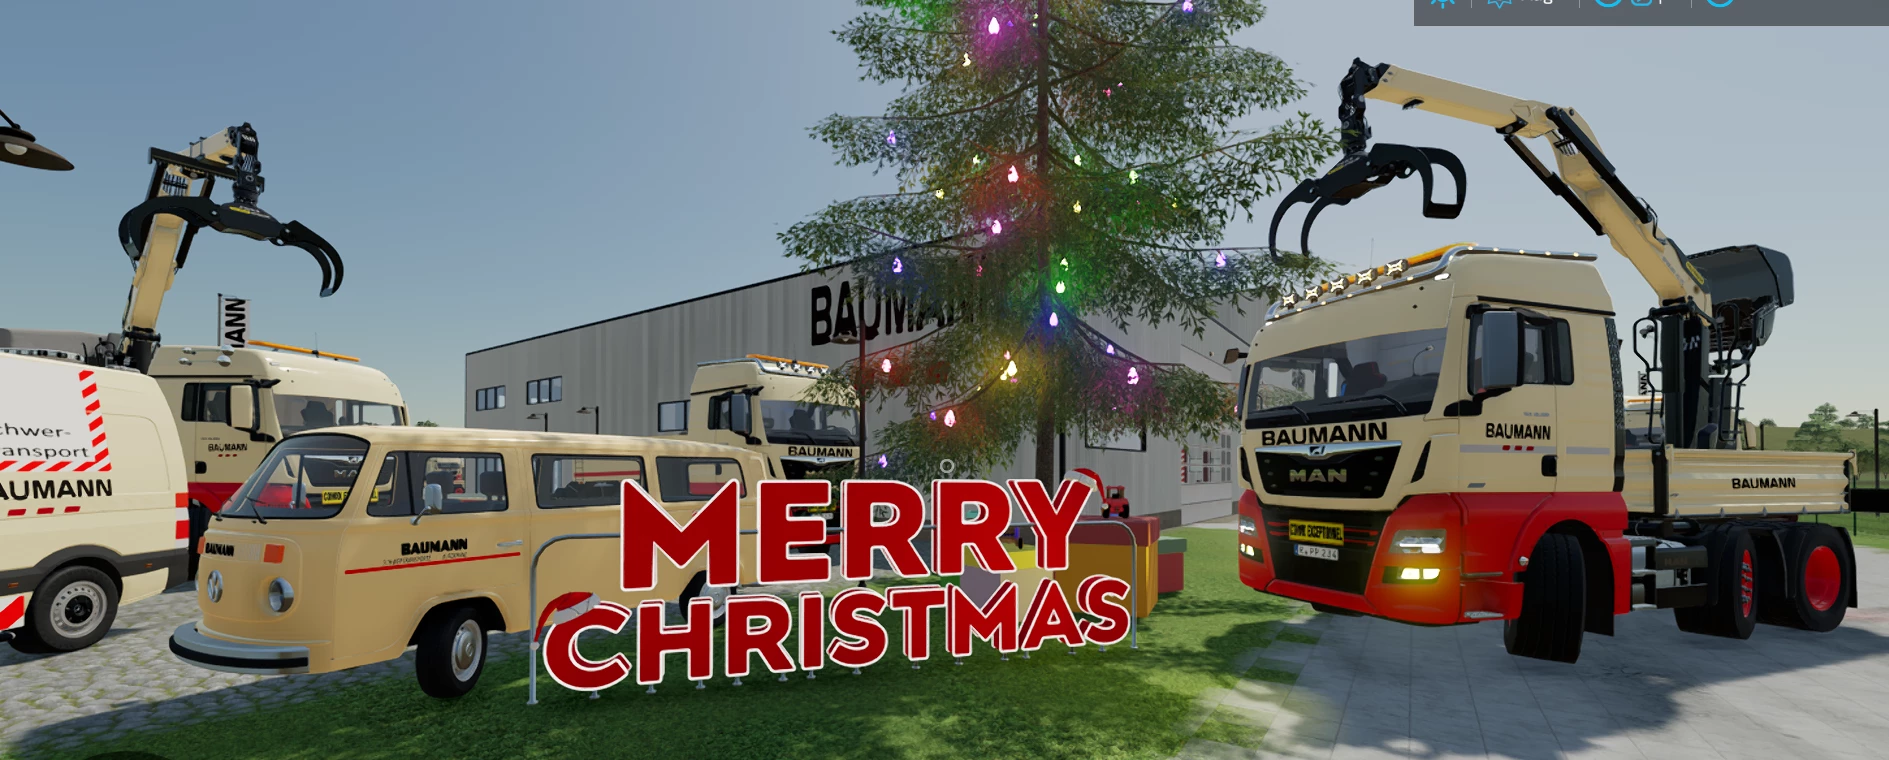 Merry christmas! to all modhub.us fans!